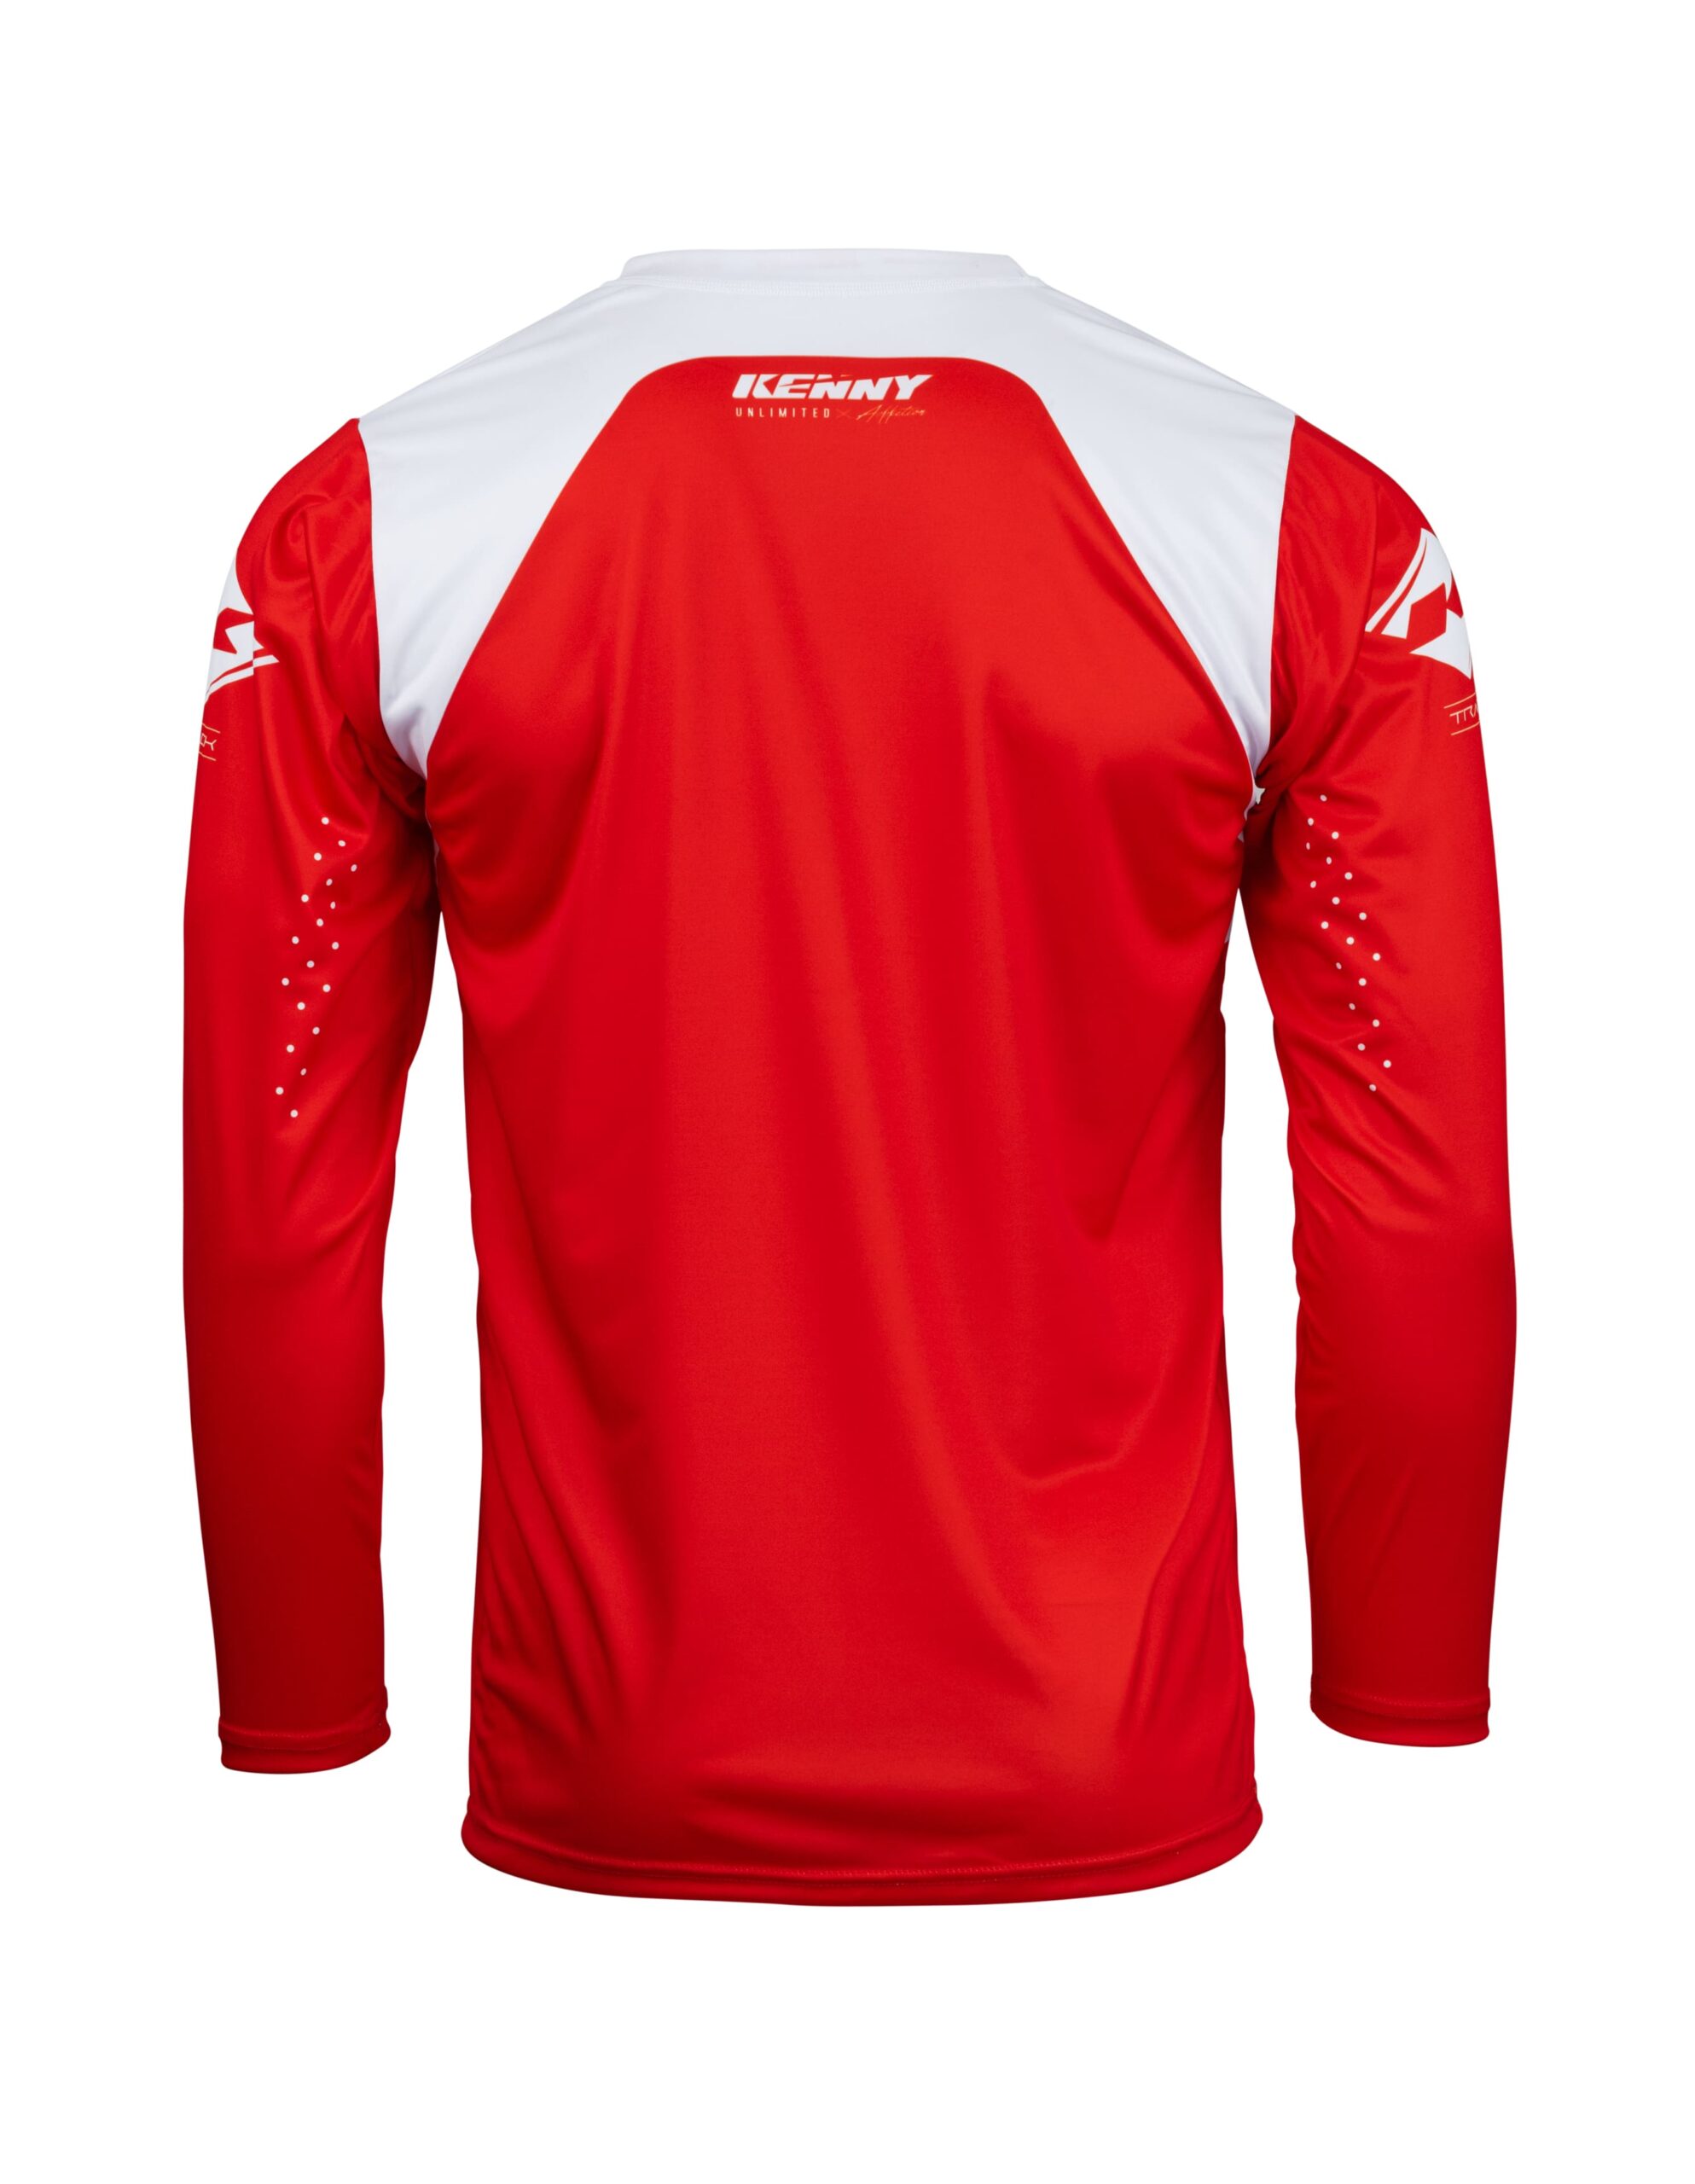 maillot_motocross_kenny_track_raw_red(3)